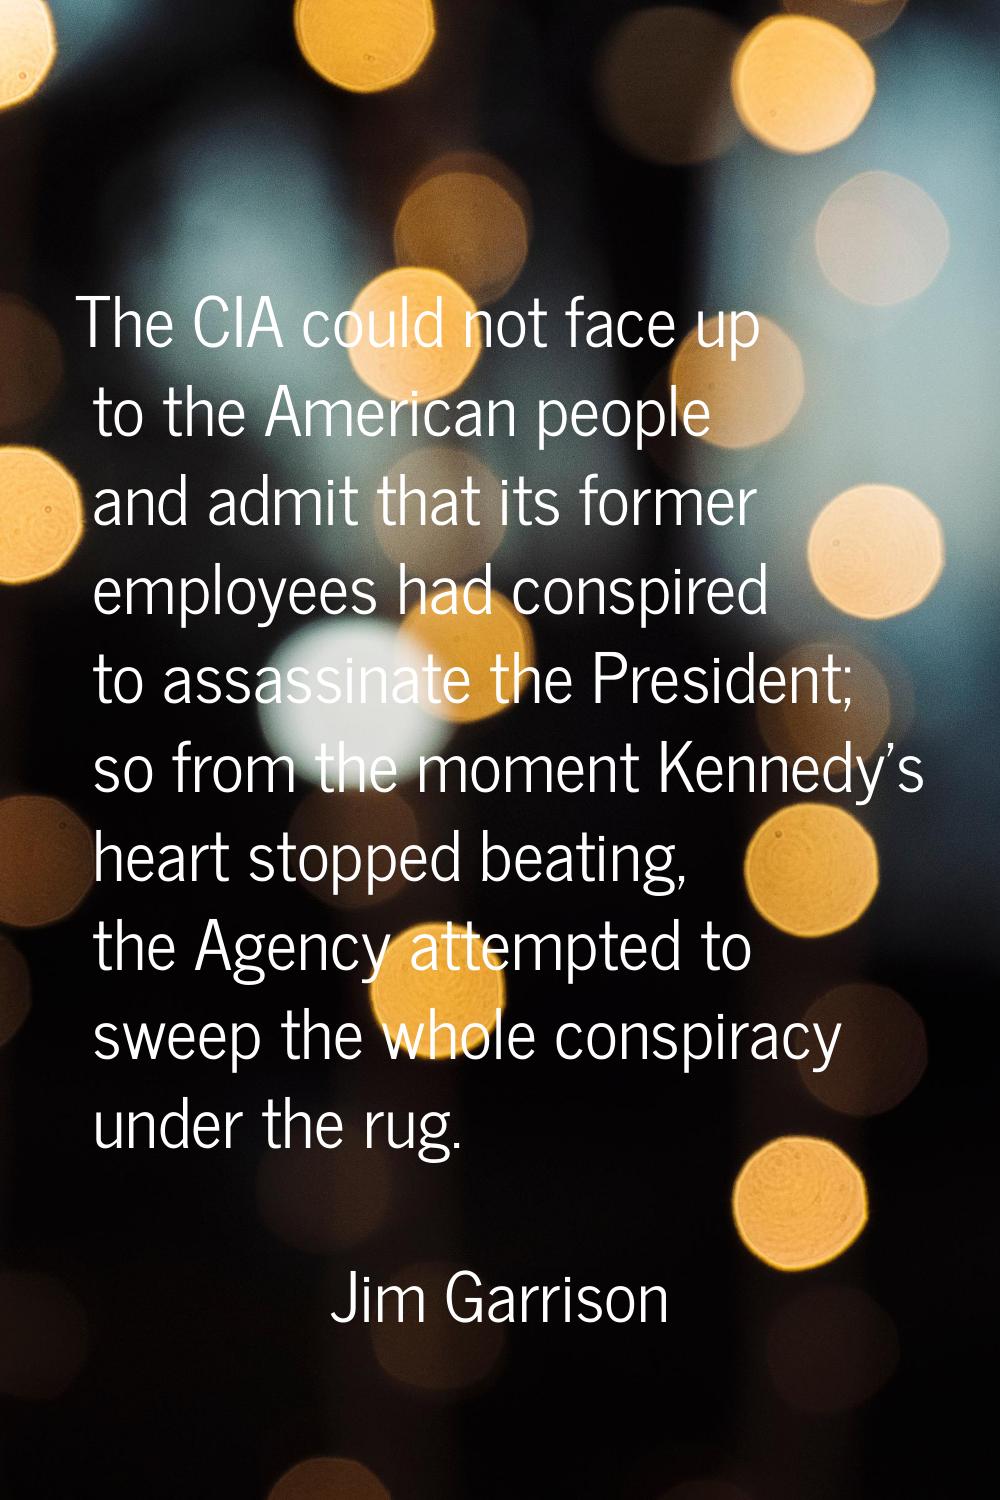 The CIA could not face up to the American people and admit that its former employees had conspired 